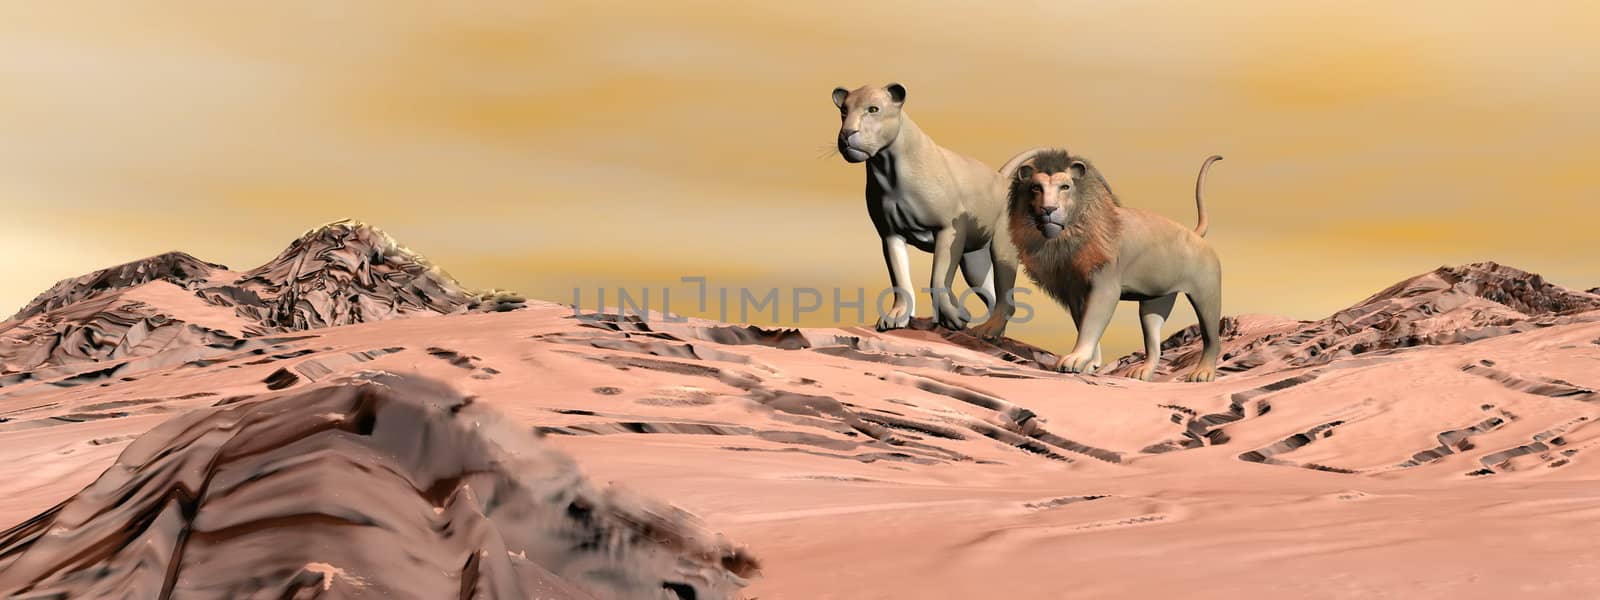 Couple of lions in the desert - 3D render by Elenaphotos21